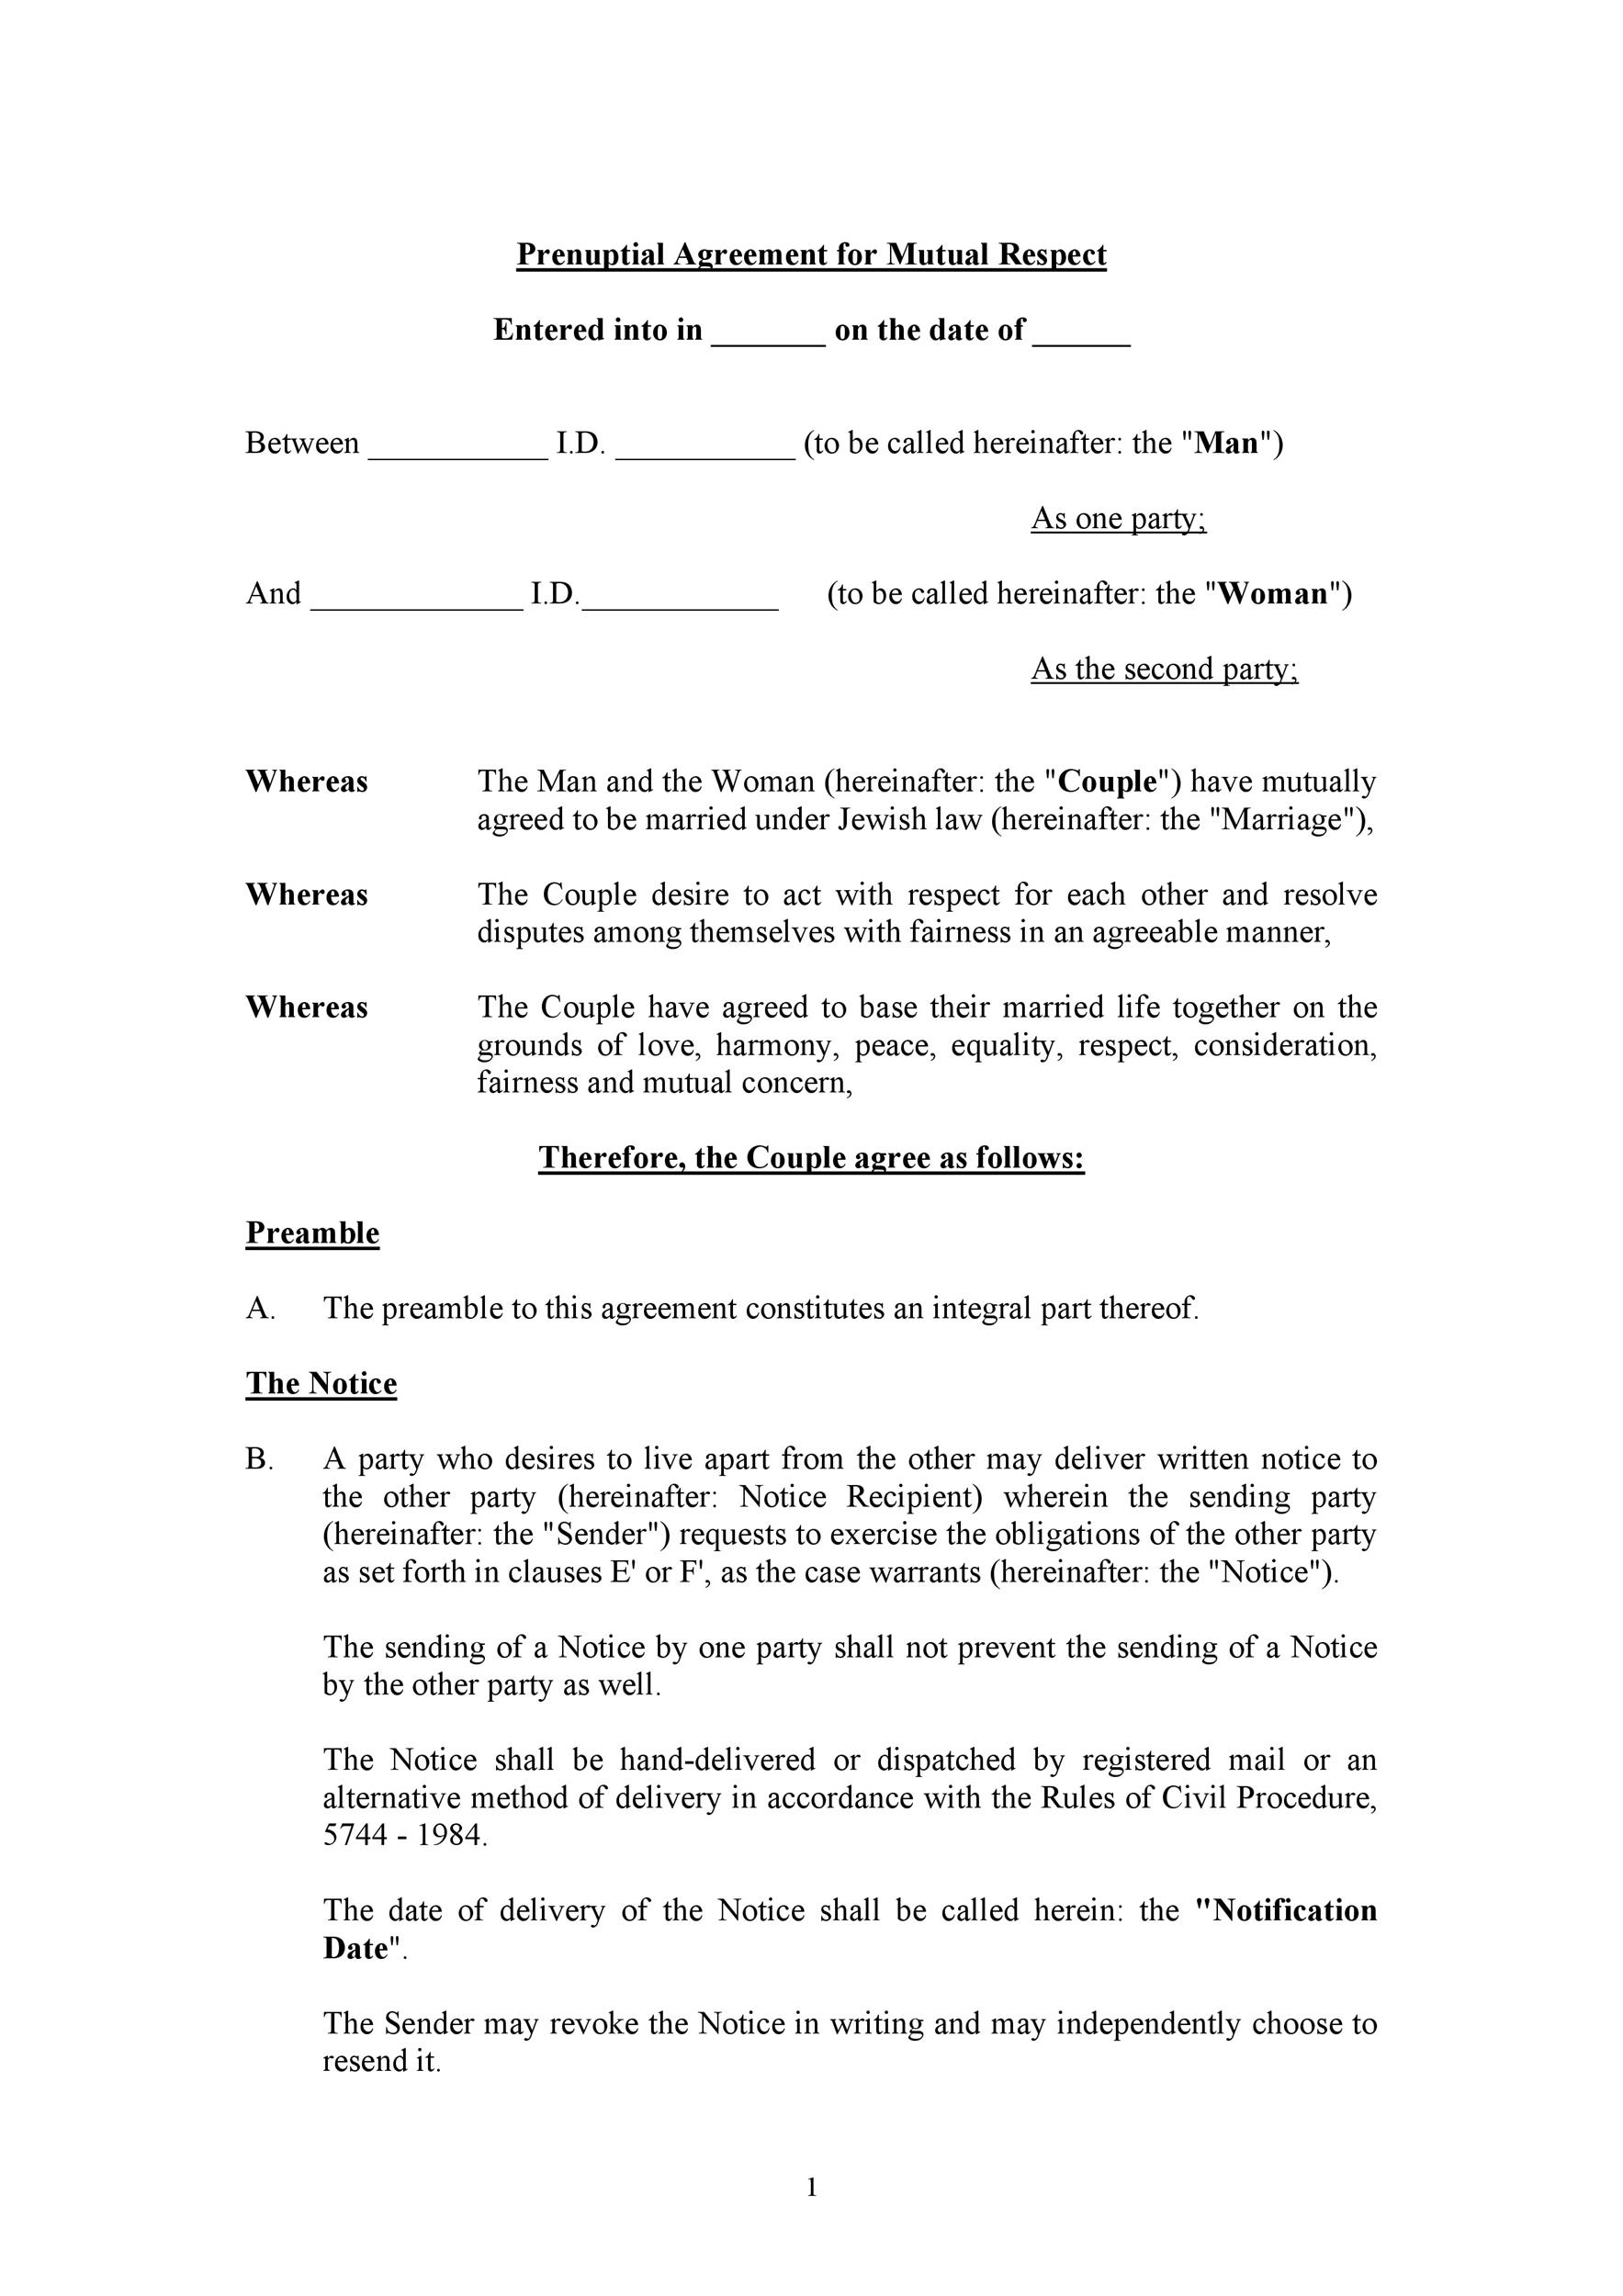 30+ Prenuptial Agreement Samples & Forms Template Lab